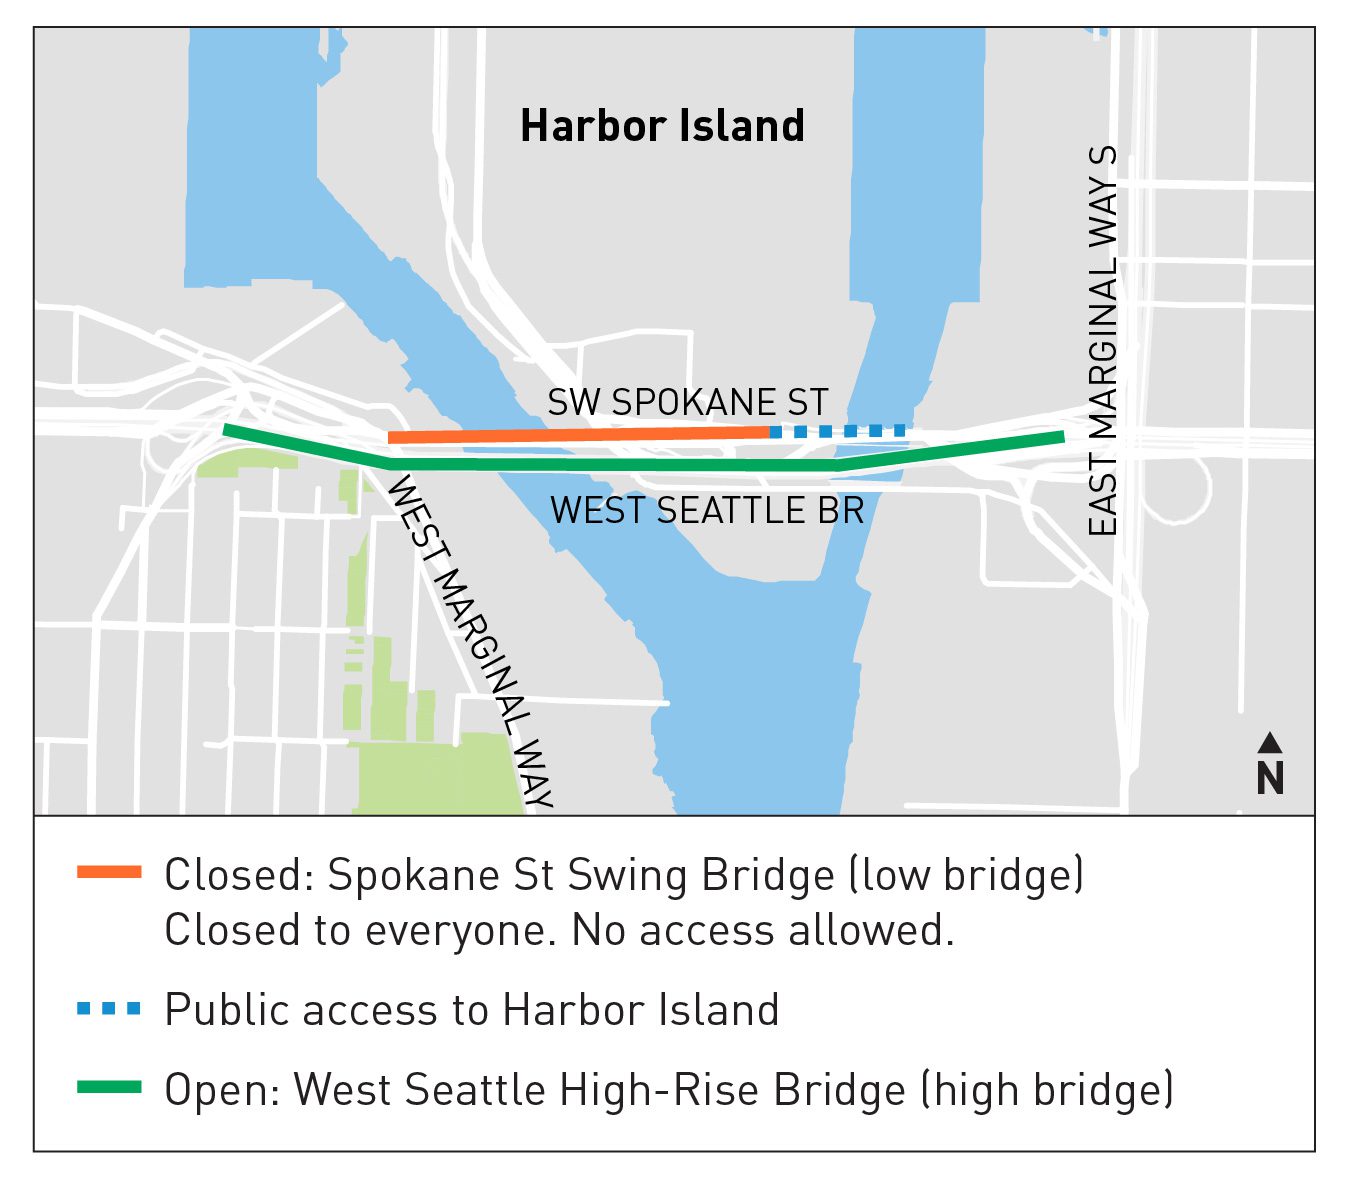 The Spokane St Swing Bridge (low bridge) shown as closed in an orange line. The West Seattle High-Rise Bridge (high bridge) is shown as open in green. Public access to Harbor Island is shown in dashed blue. East Marginal Way and West Marginal Way streets are also labeled.